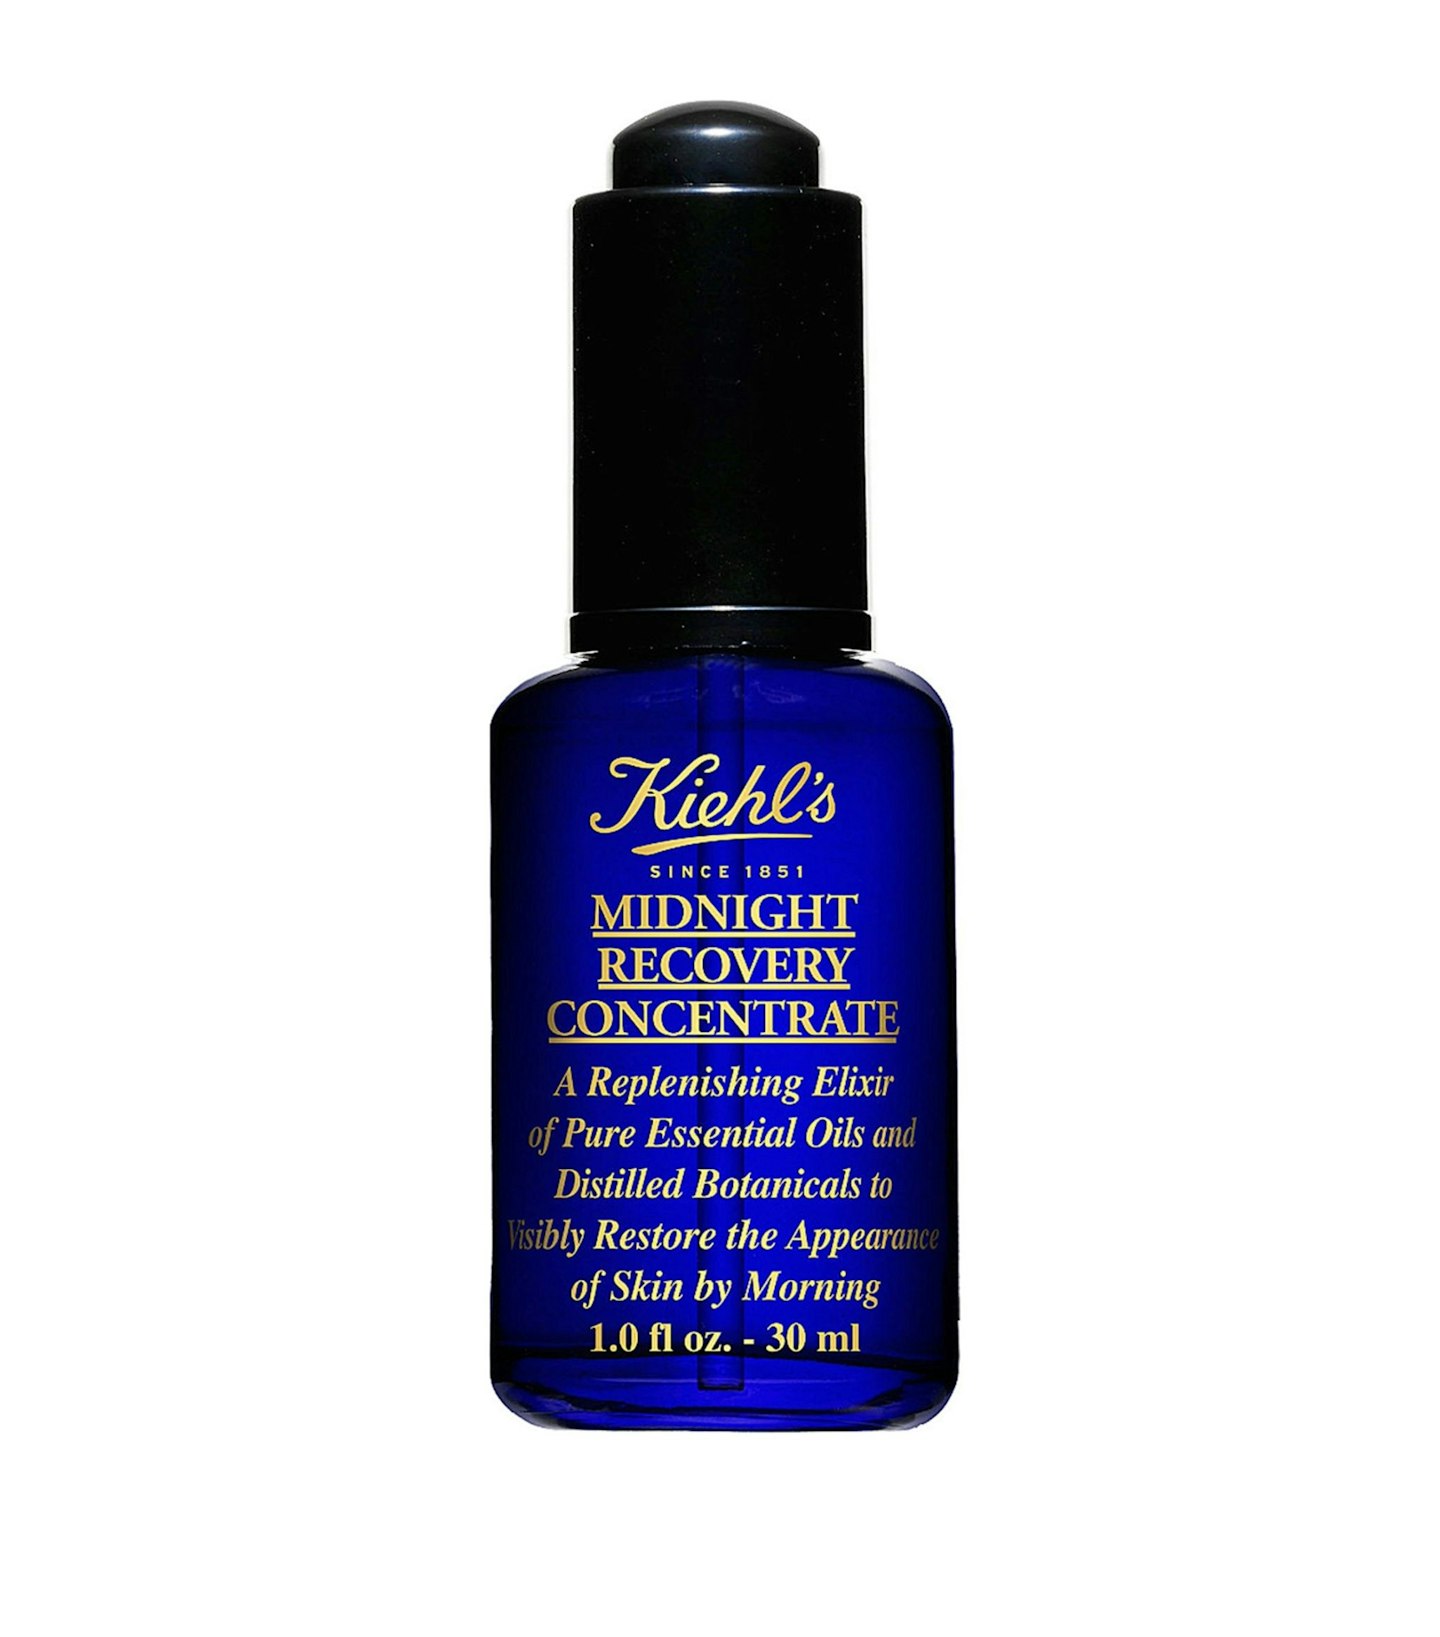 Kiehl's Midnight Recovery Concentrate, £40